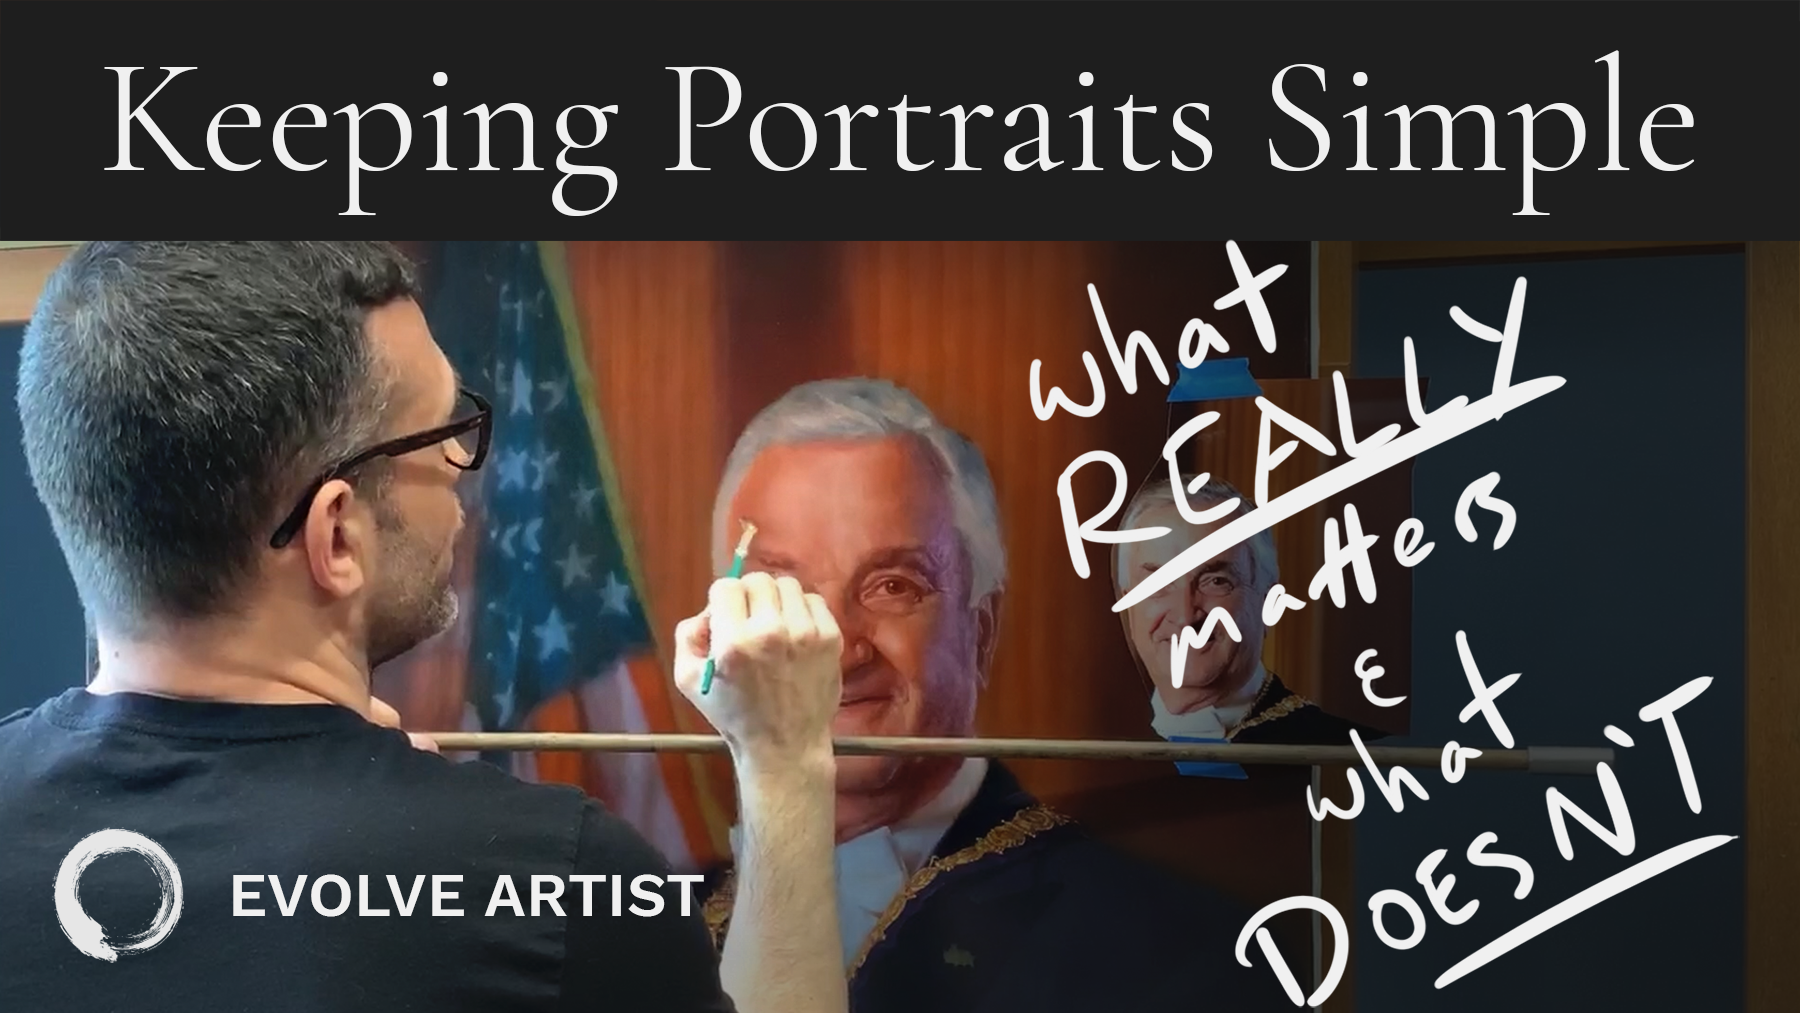 YouTube Video Simplicity in Portrait Painting